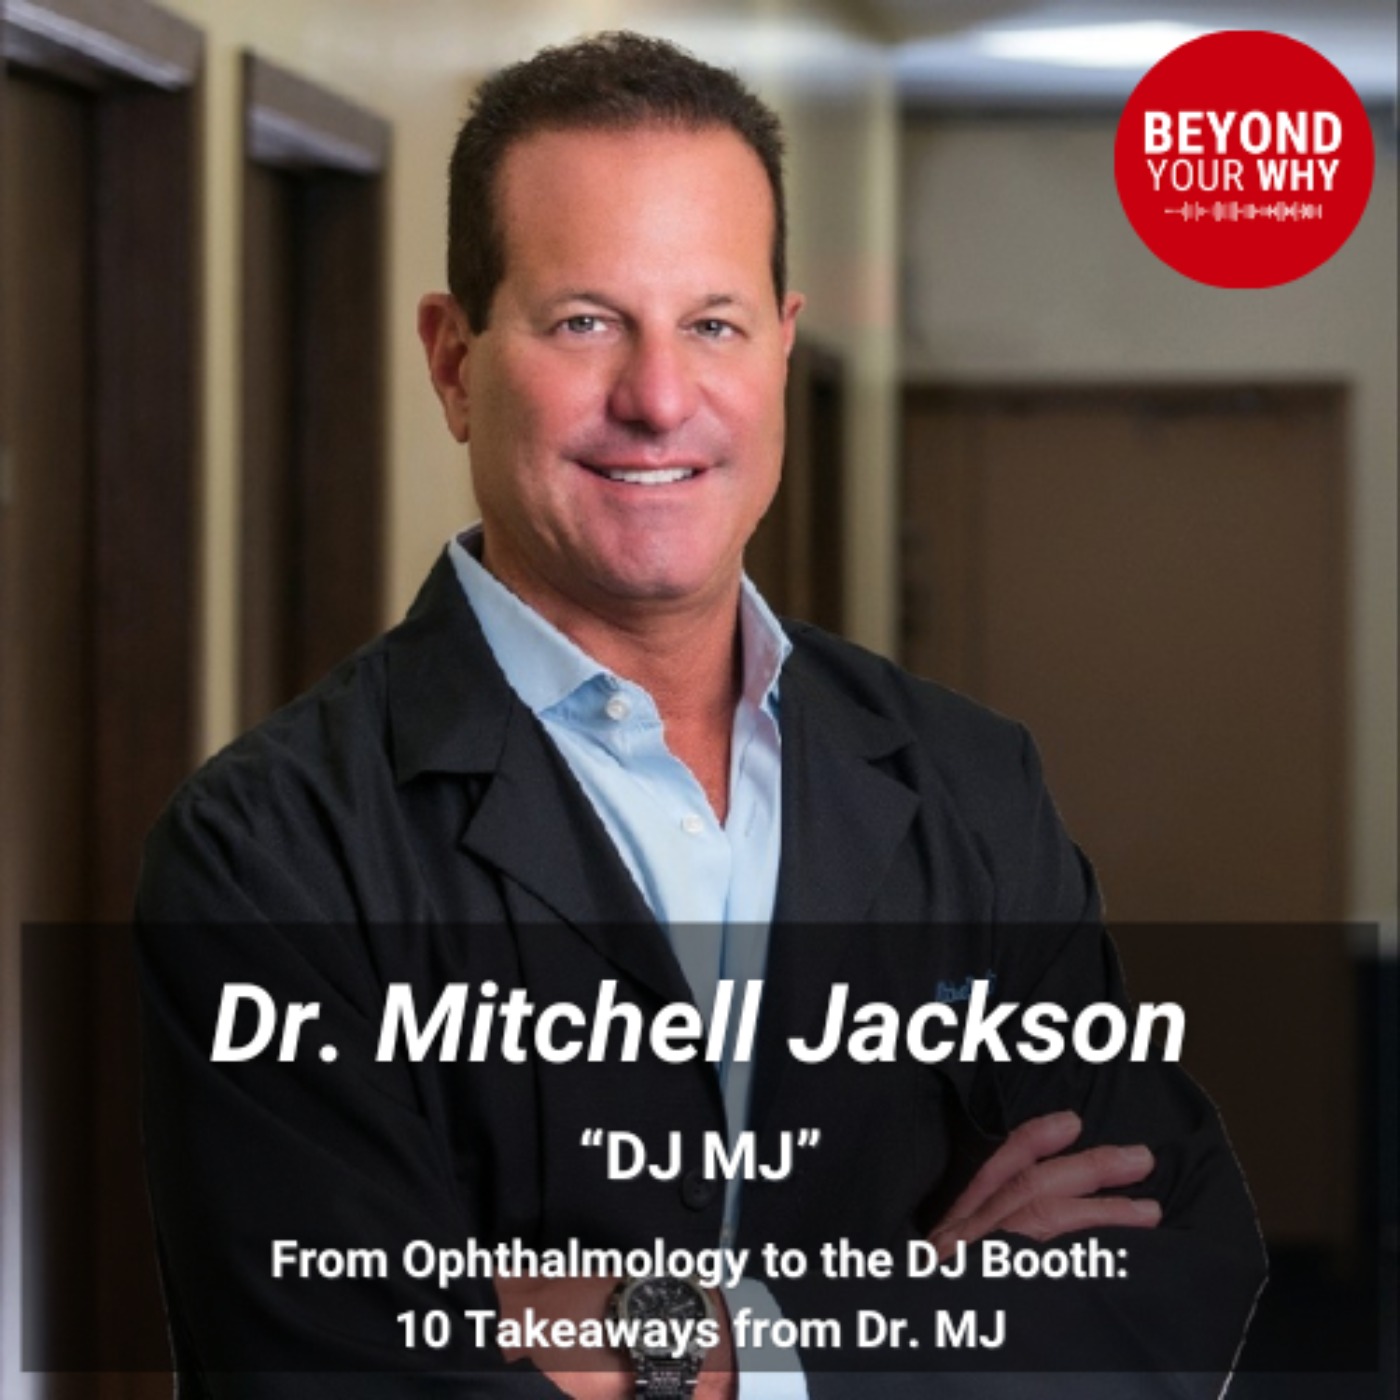 From Ophthalmology to the DJ Booth: 10 Takeaways from Dr. MJ